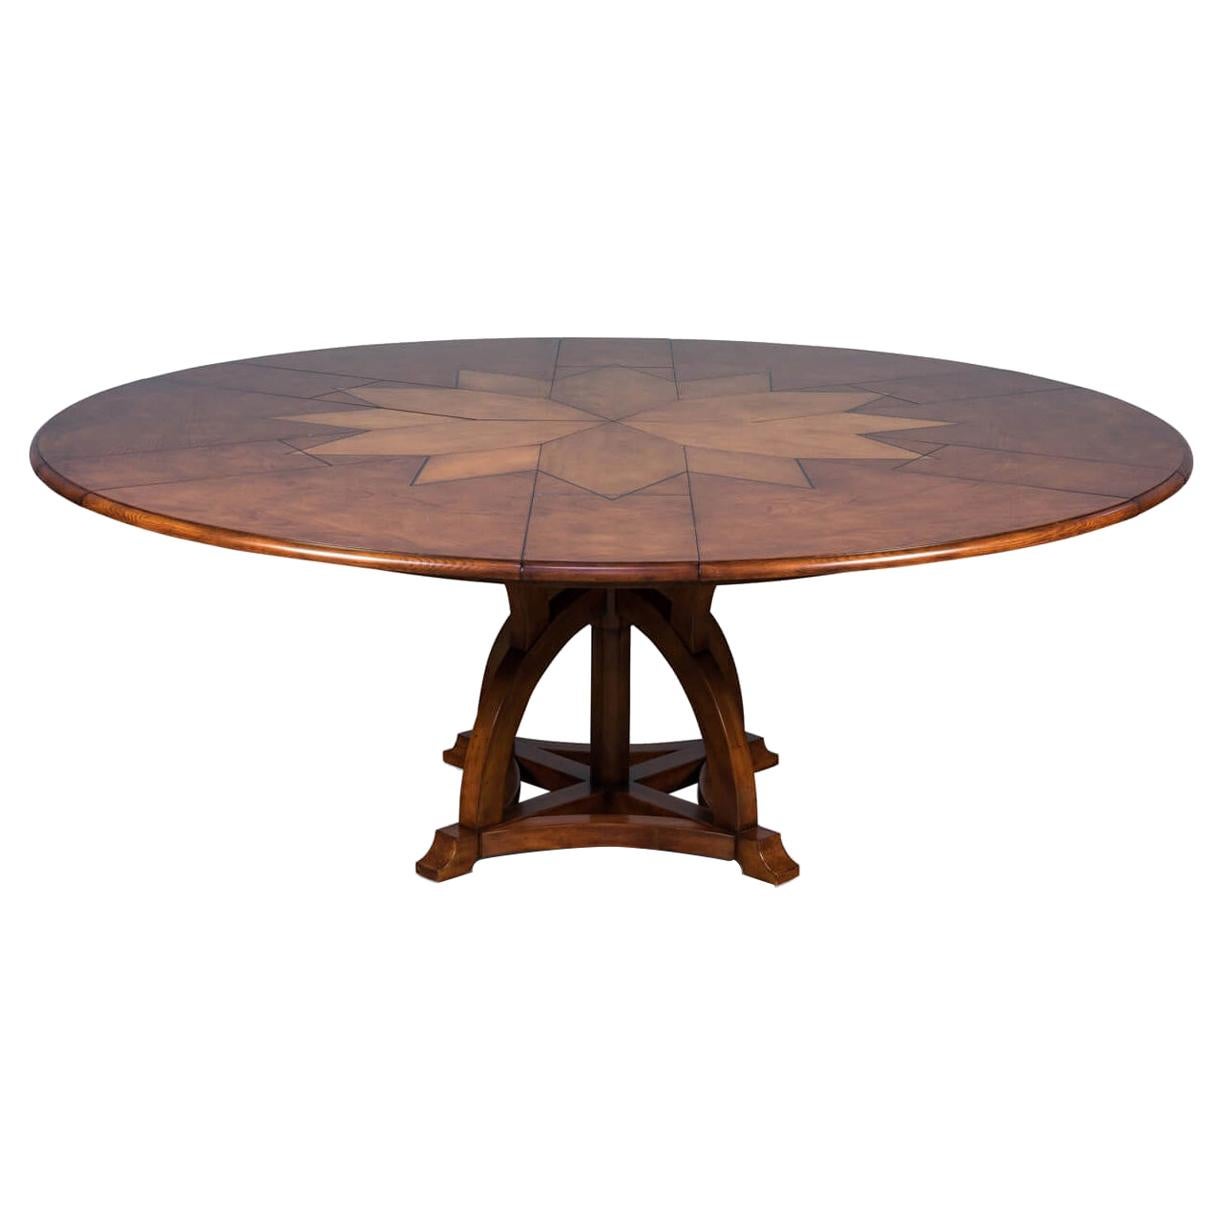 Is a round dining table practical?